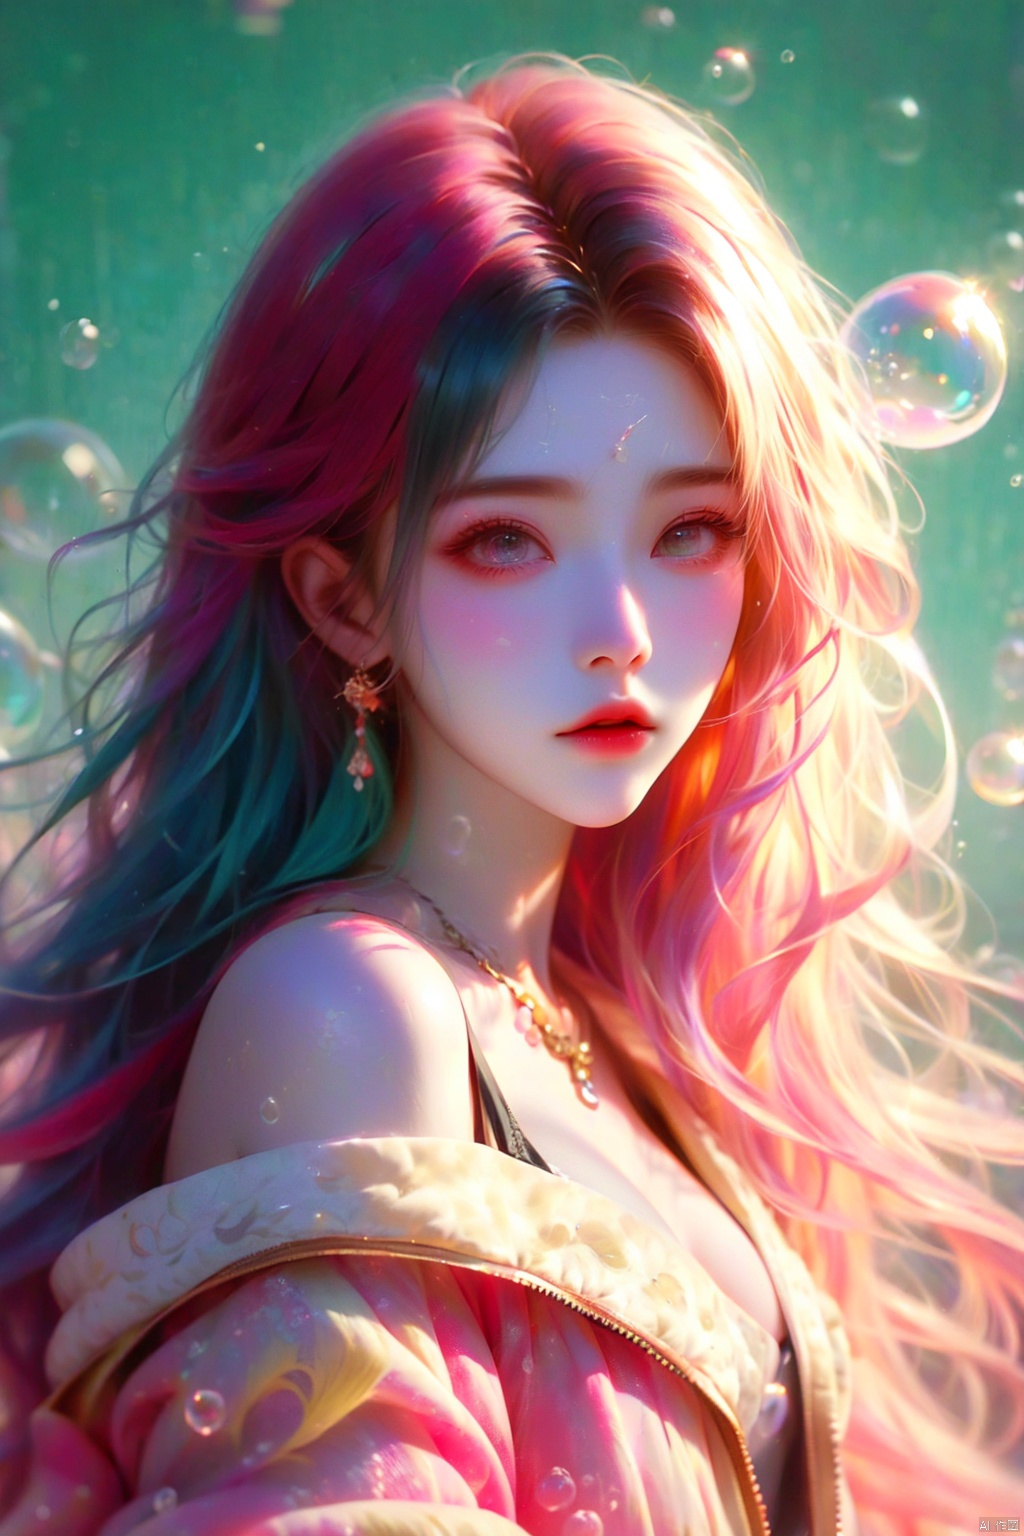  pink hair,(bubble:1.5),Horror Theme,Anne Bachelier's works,emitting a sense of arrogance,emitting sexual sensations,a female beautiful [bats|woman],bangs,oversize jacket,plunging neckline,multicolored hair,blue hair,aqua eyes,makeup,detailed Purple eyes,Pixie cut,hyper detailed,highly detailed,colorful details,very intricate details,[k-pop],upper body:0.778,Corpse Party: Blood Drive, (\shuang hua\), (\meng ze\), guzhuang